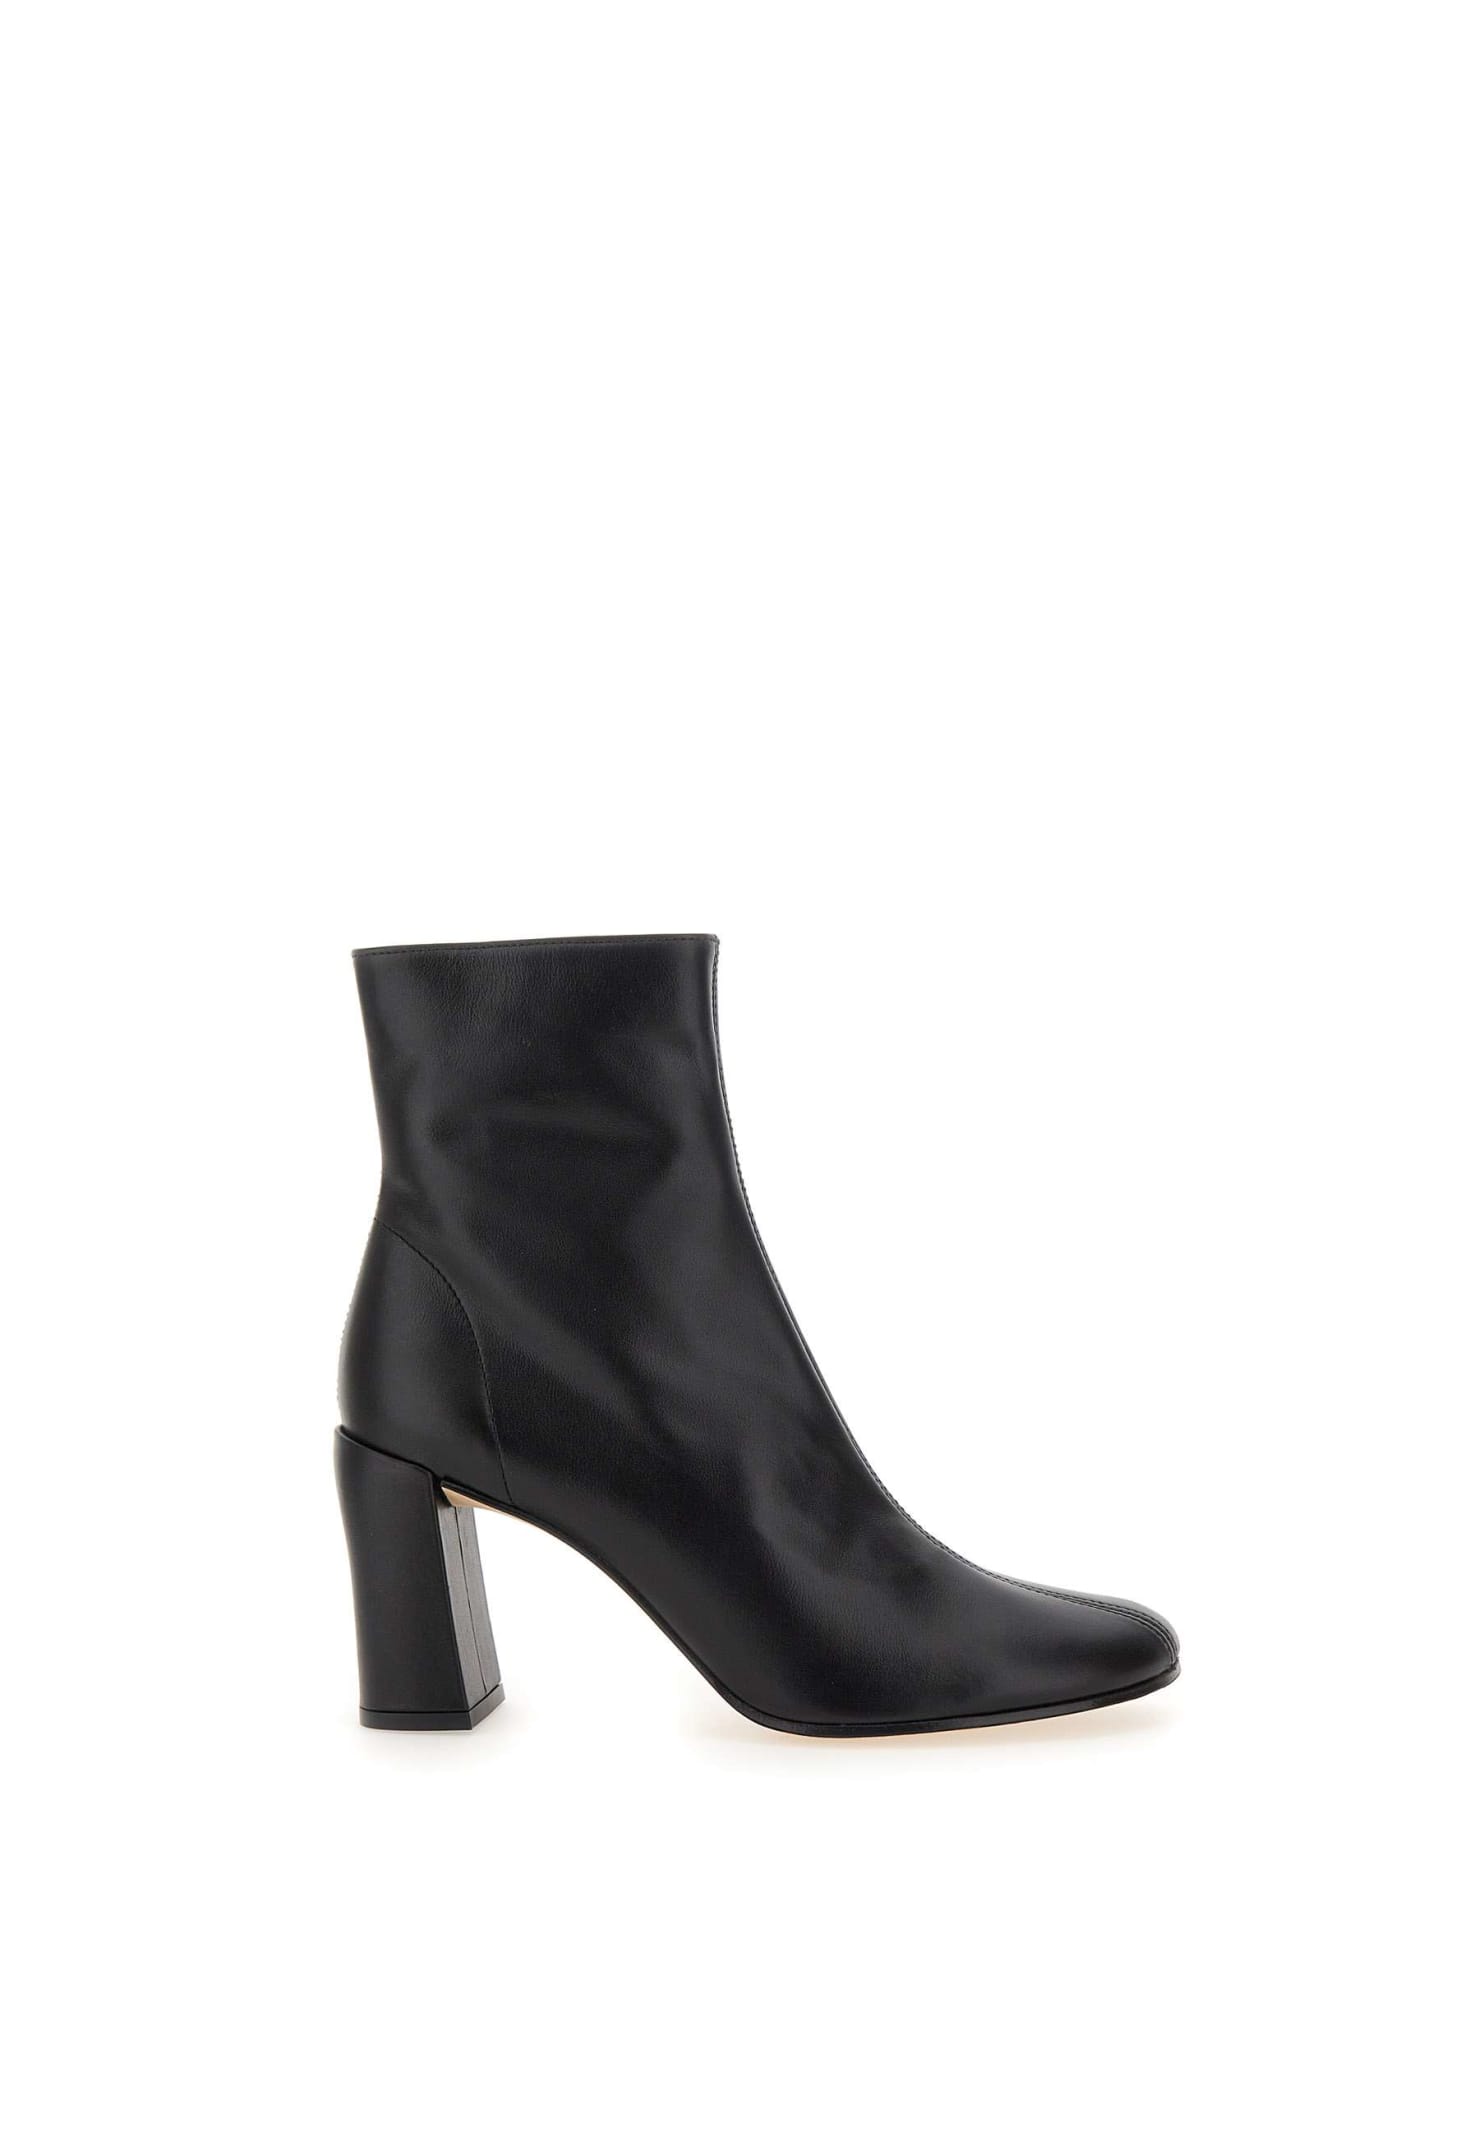 BY FAR vlada Cowhide Ankle Boot